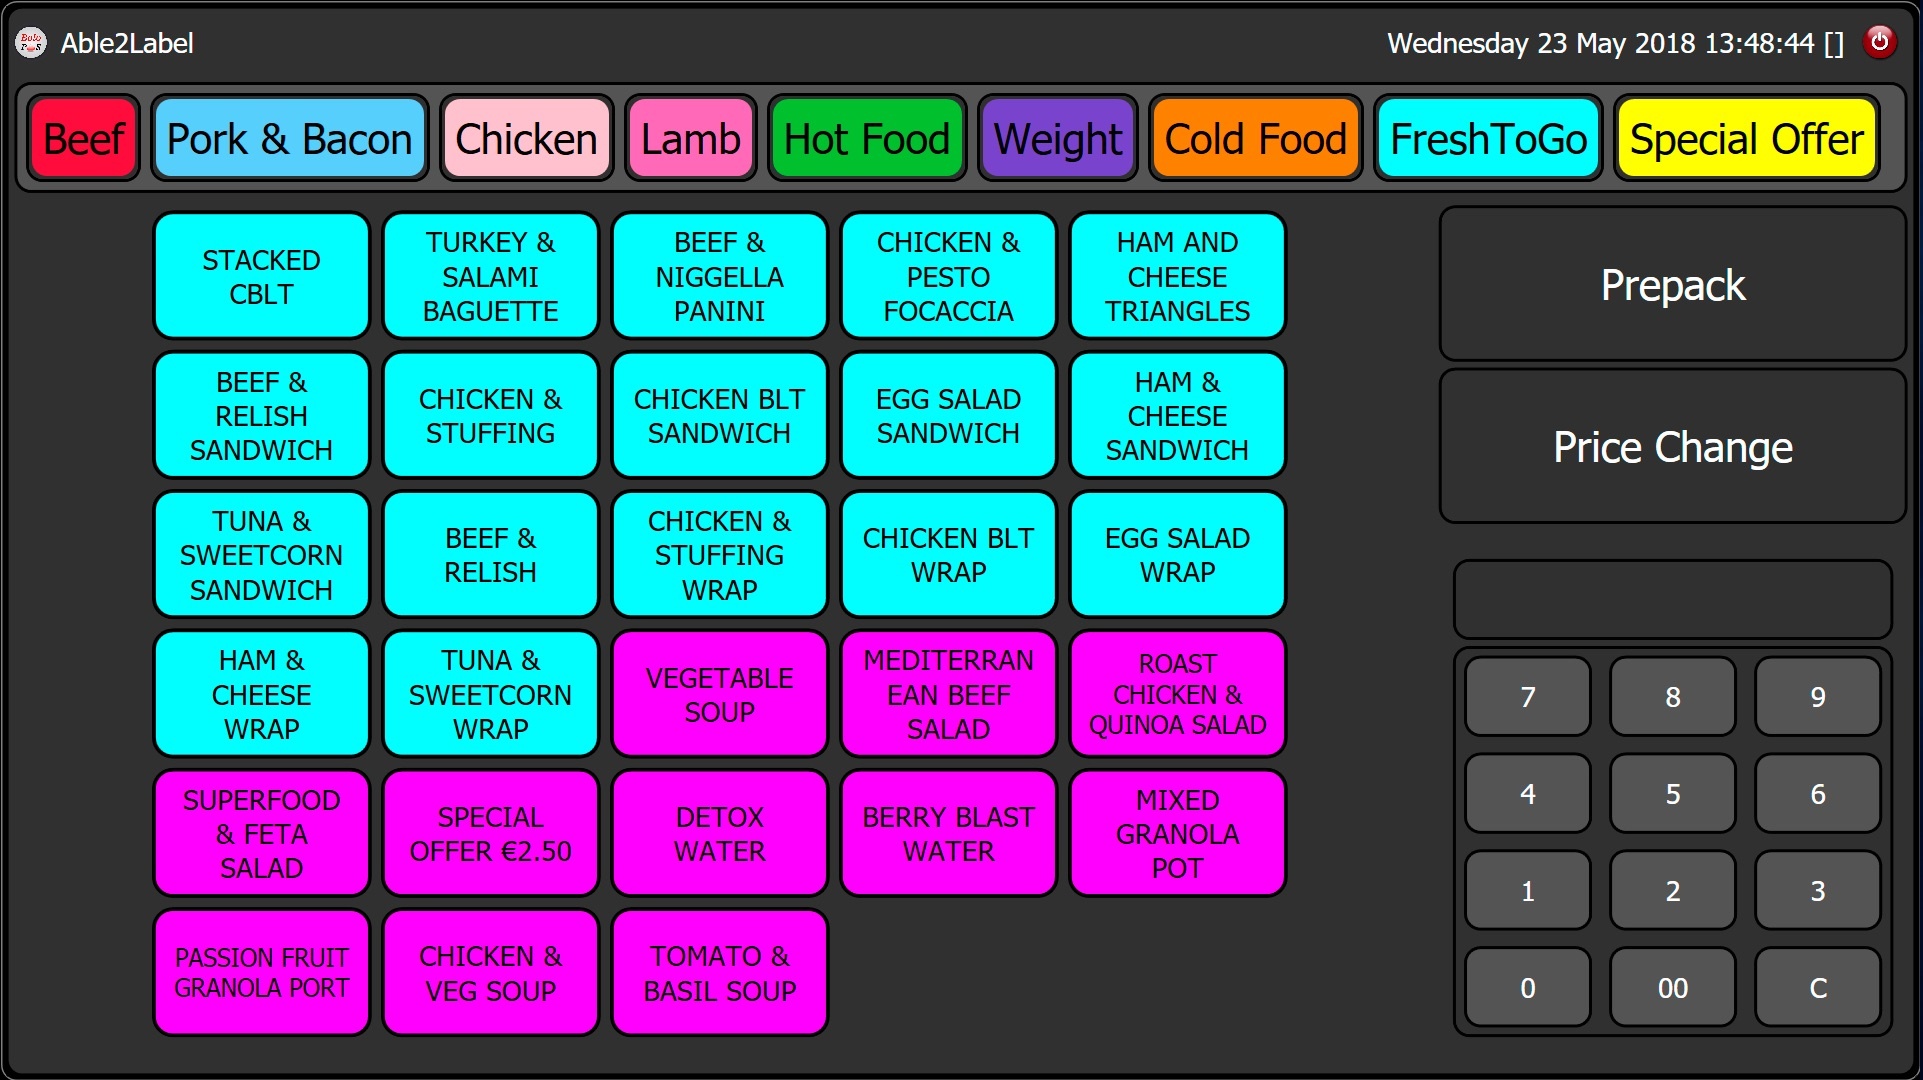 A sample screen of fresh-to-go products on Able2Label